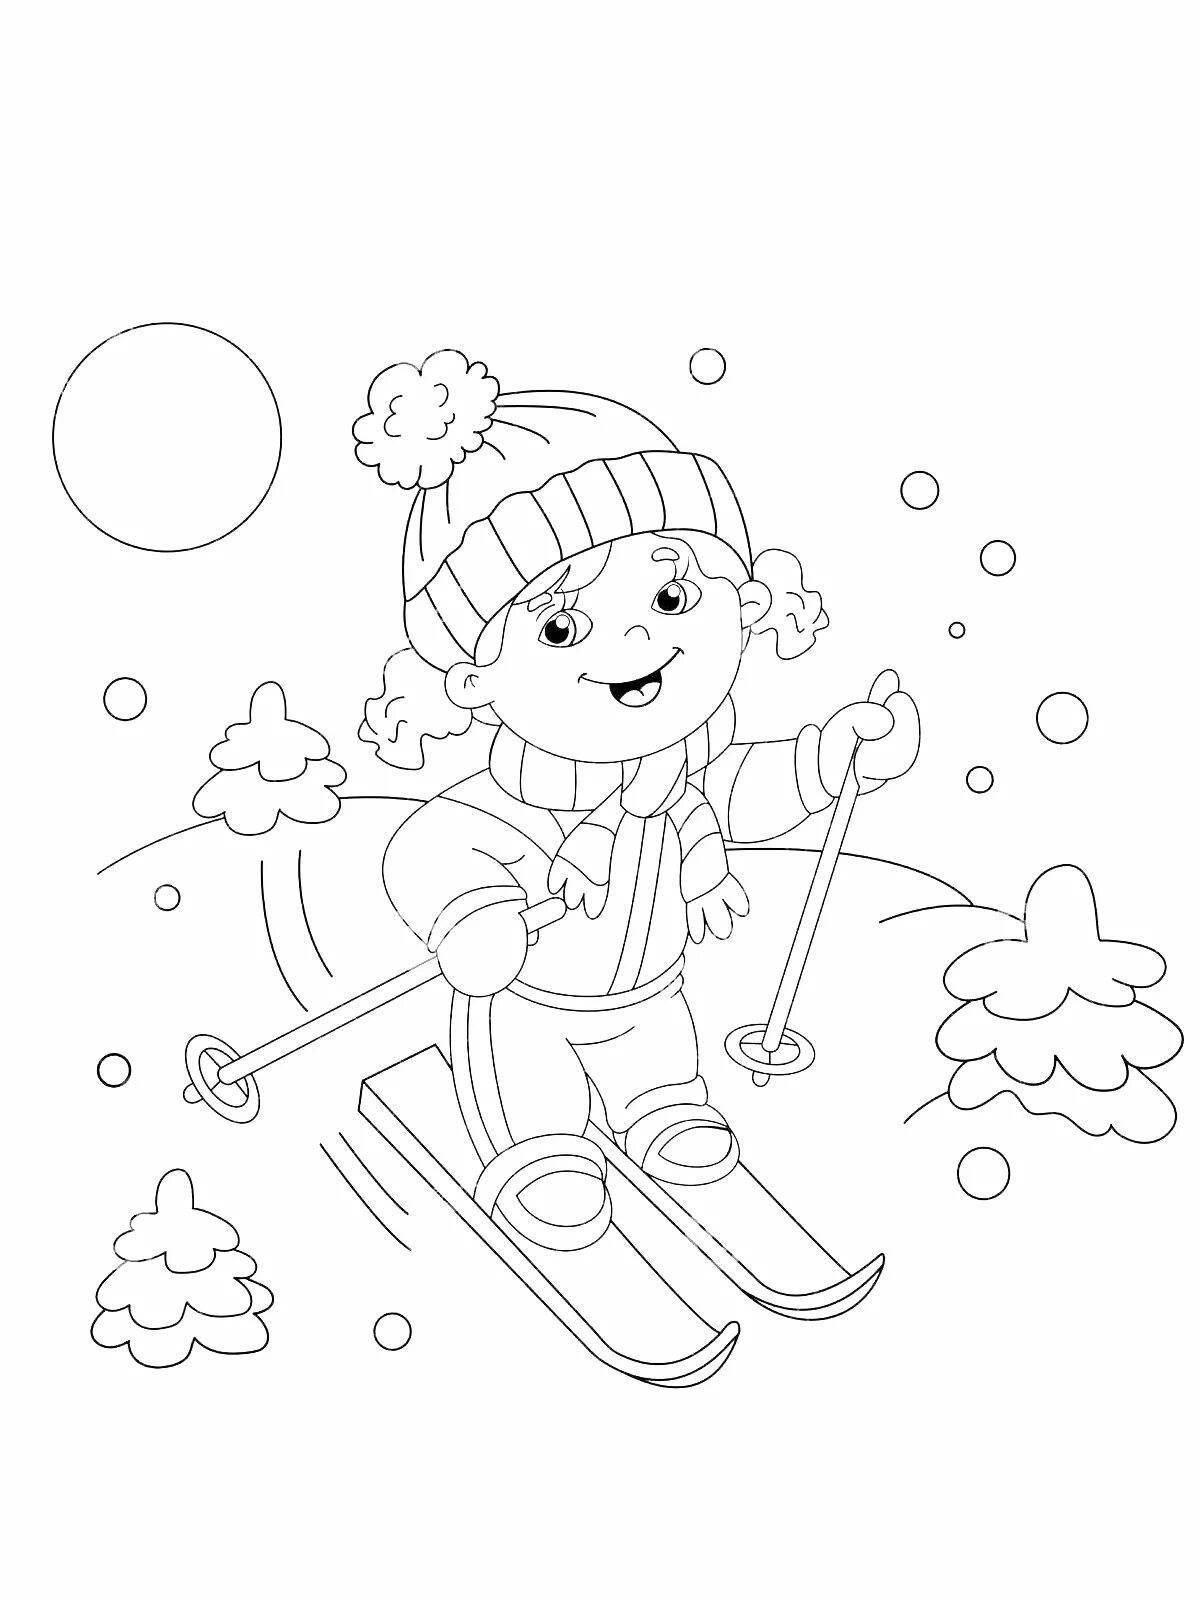 Stimulating winter sports coloring page